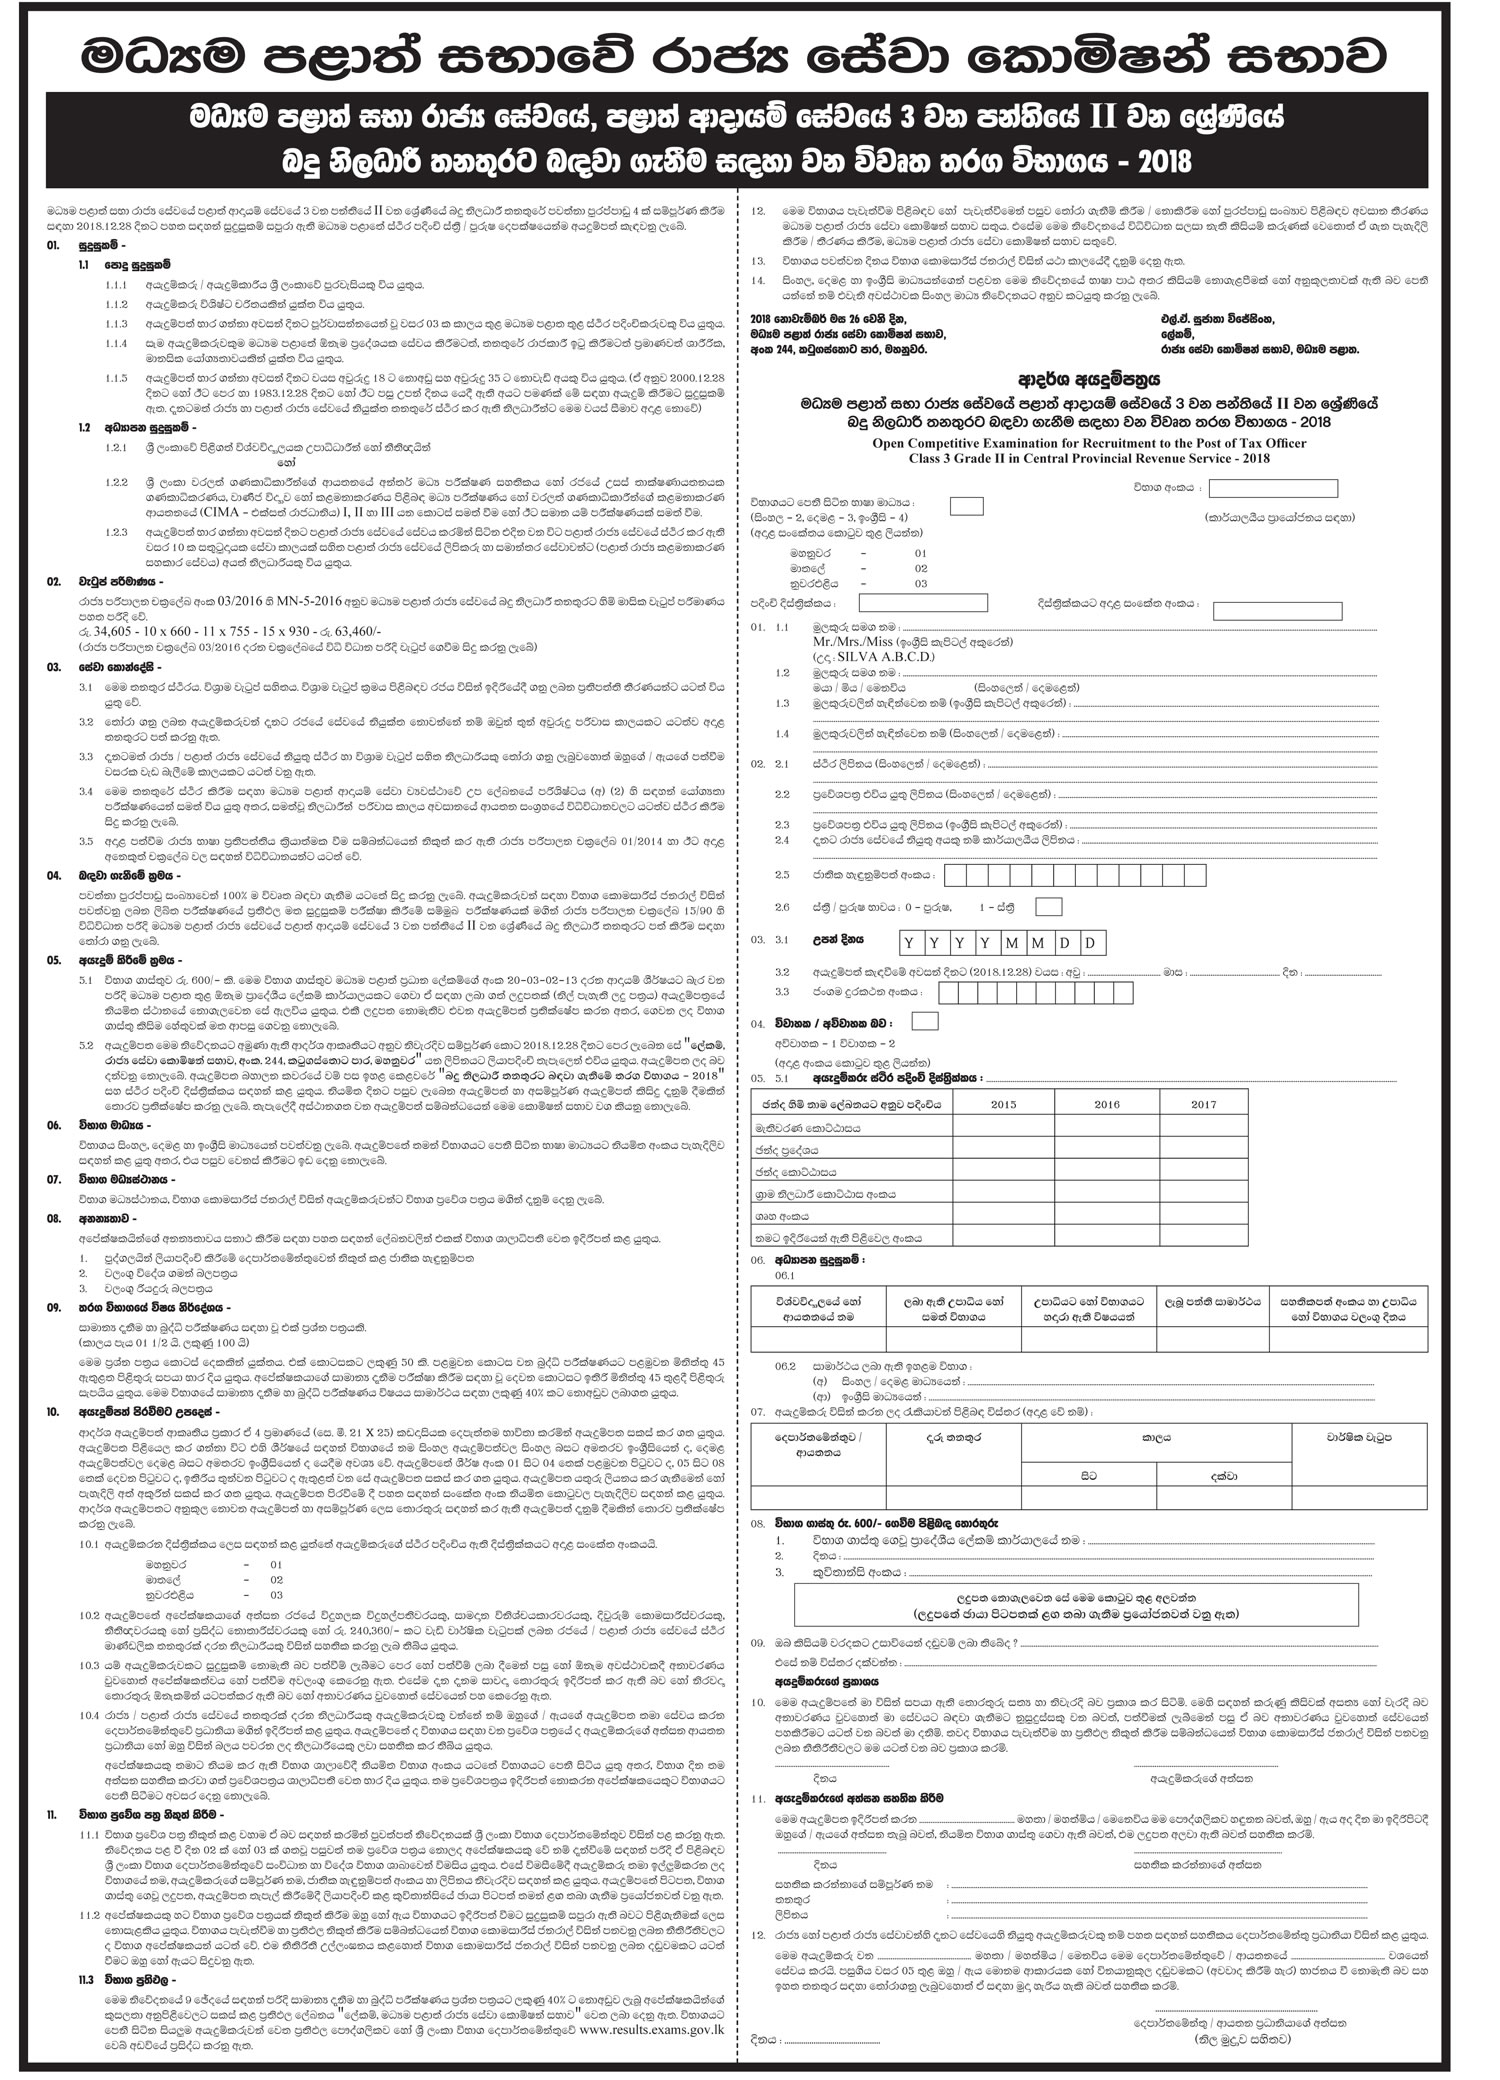 Tax Officer (Open Exam) - North Central Provincial Public Service